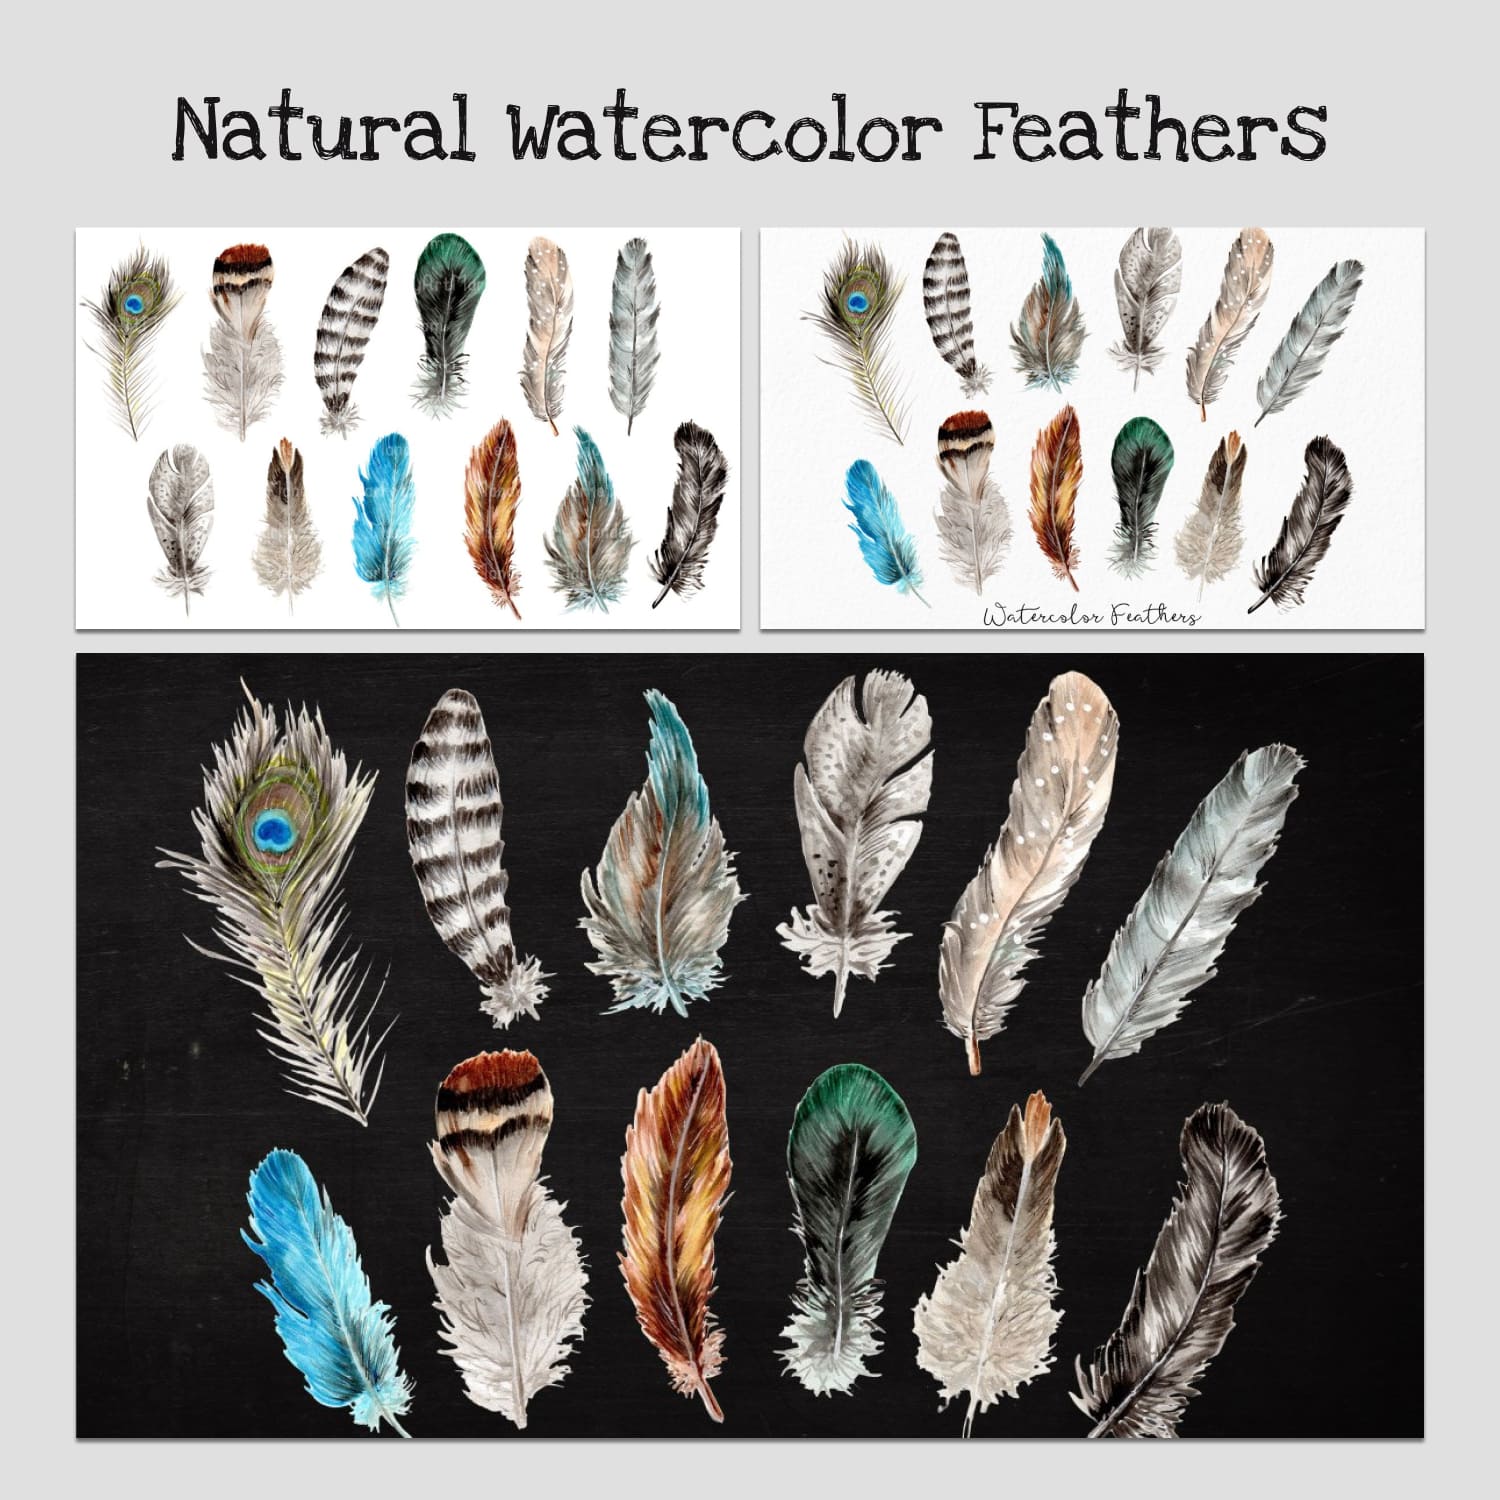 Natural Watercolor Feathers Collection cover image.